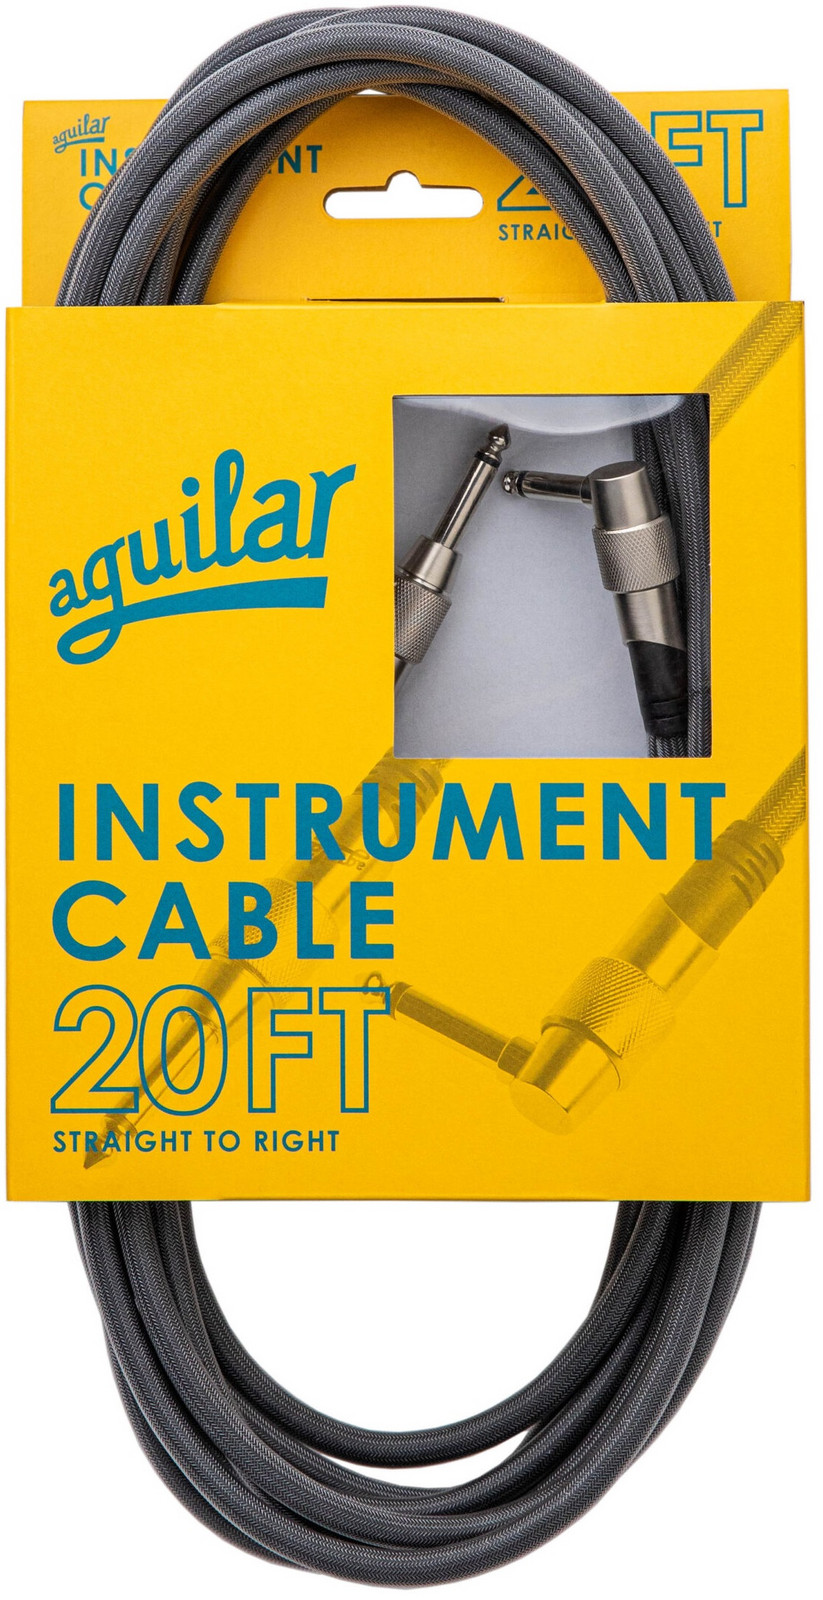 Aguilar Instrument Cable Angled 6 m